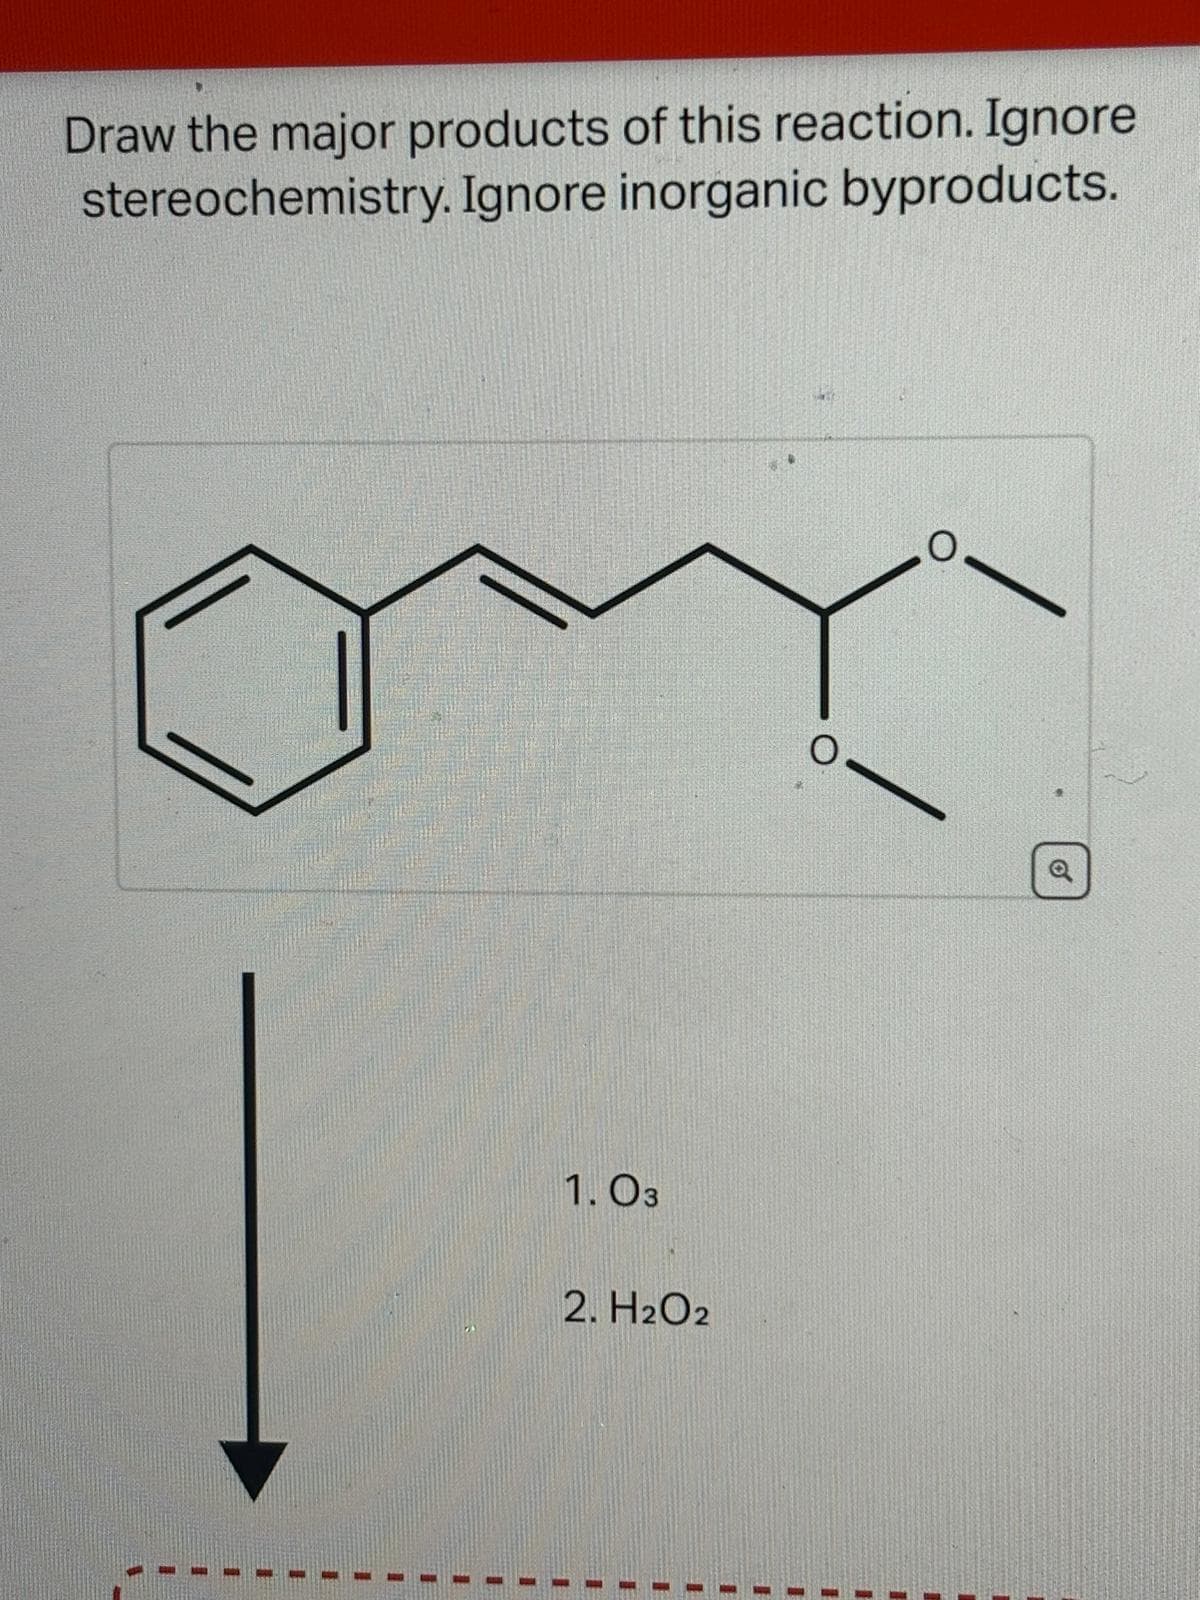 Draw the major products of this reaction. Ignore
stereochemistry. Ignore inorganic byproducts.
1.03
2. H₂O2
O
o